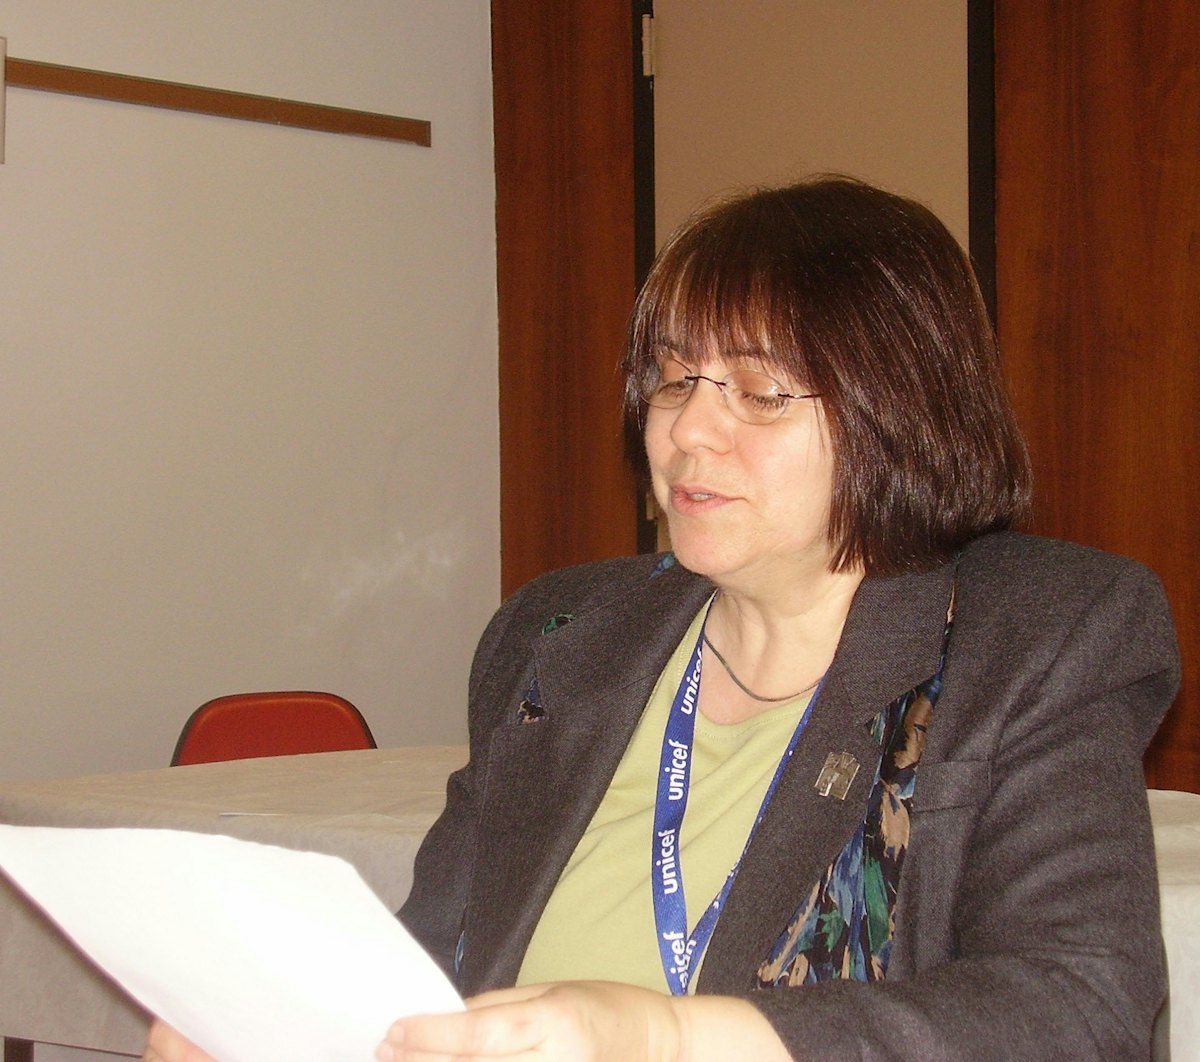 Elizabeth Wright, director of the Office for the Advancement of Women of the Baha'i Community of Canada, made a presentation on Bahiyyih Khanum at a workshop on "Role Models of Women in Decision-making," which sponsored by the Baha'i International Community on 27 February 2006.